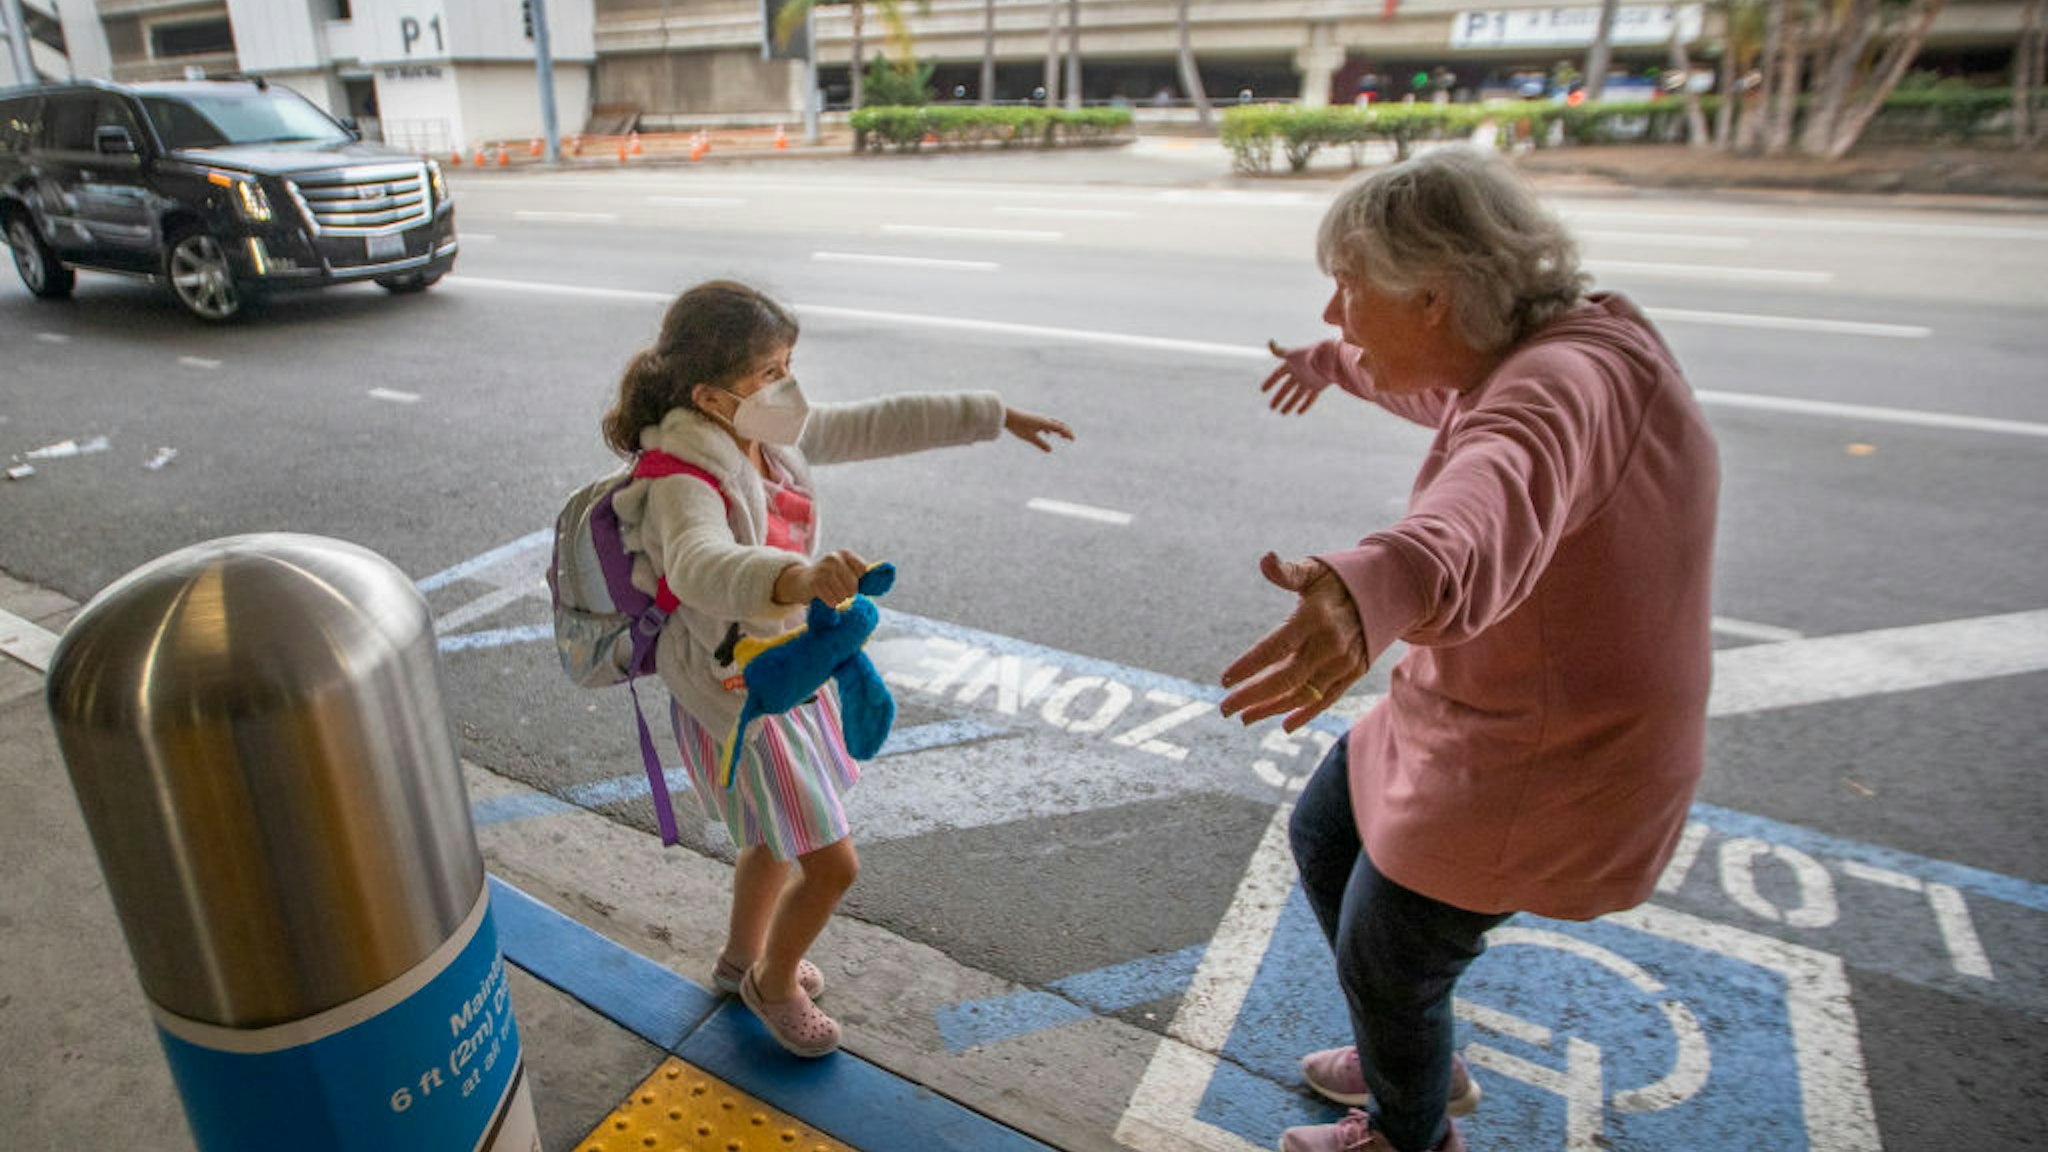 LOS ANGELES, CA - NOVEMBER 23: Traveler Jacquie Carney, 7, of San Antonio, TX, runs to hug her grandma, Donna Vidrine, of San Clemente, upon arrival at LAX as the Thanksgiving holiday getaway period gets underway on Monday, Nov. 23, 2020 in Los Angeles, CA. Millions of Americans are carrying on with their travel plans ahead of Thanksgiving weekend despite the CDC's urgent warnings to stay home as the number of daily cases and hospitalizations in the country continue to hit record highs. Confirmed cases in the U.S. for the disease topped 12 million on Saturday as more than 193,000 new infections were recorded in the US on Friday. This broke the previous record for the largest single-day spike on Thursday - and over 82,000 patients are now hospitalized across the country. (Allen J. Schaben / Los Angeles Times via Getty Images)